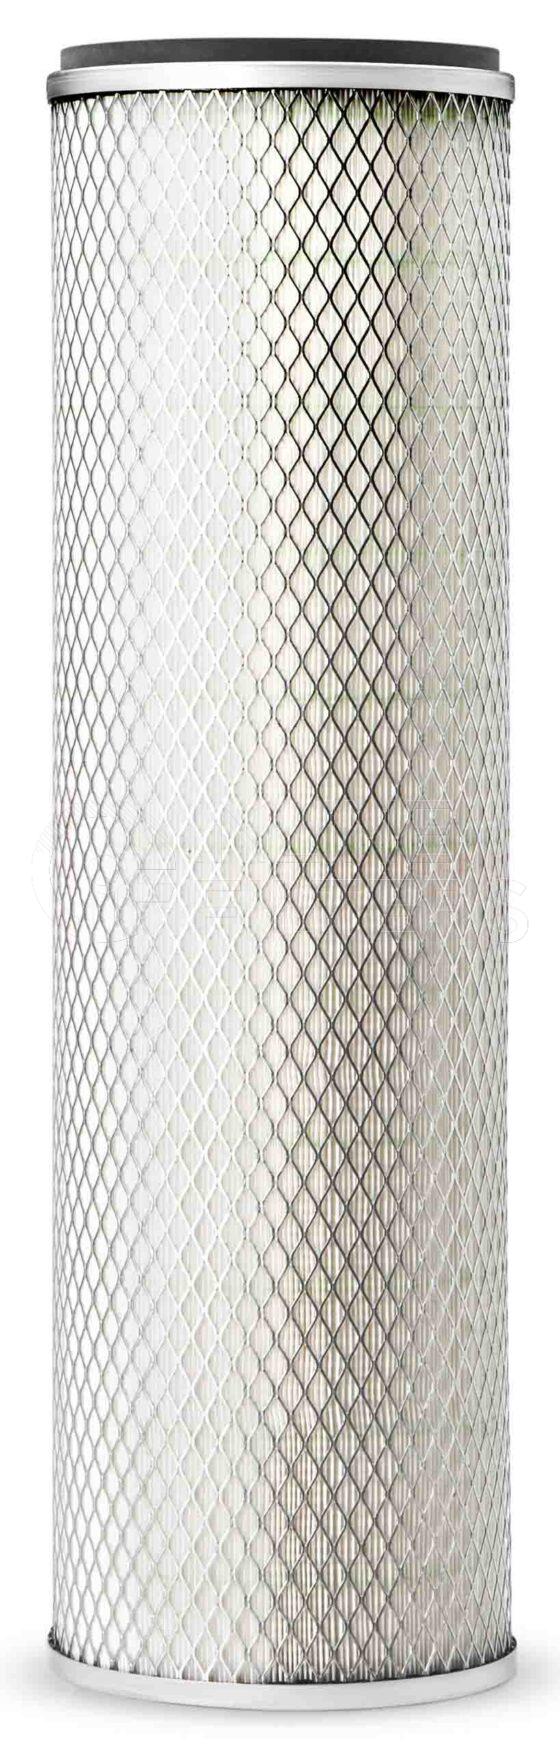 Fleetguard AF4675. Air Filter Product – Brand Specific Fleetguard – Cartridge Product Fleetguard filter product Air Filter. For Housing use AH1152. Main Cross Reference is Locker Airmaze CD1628610827. Fleetguard Part Type AF